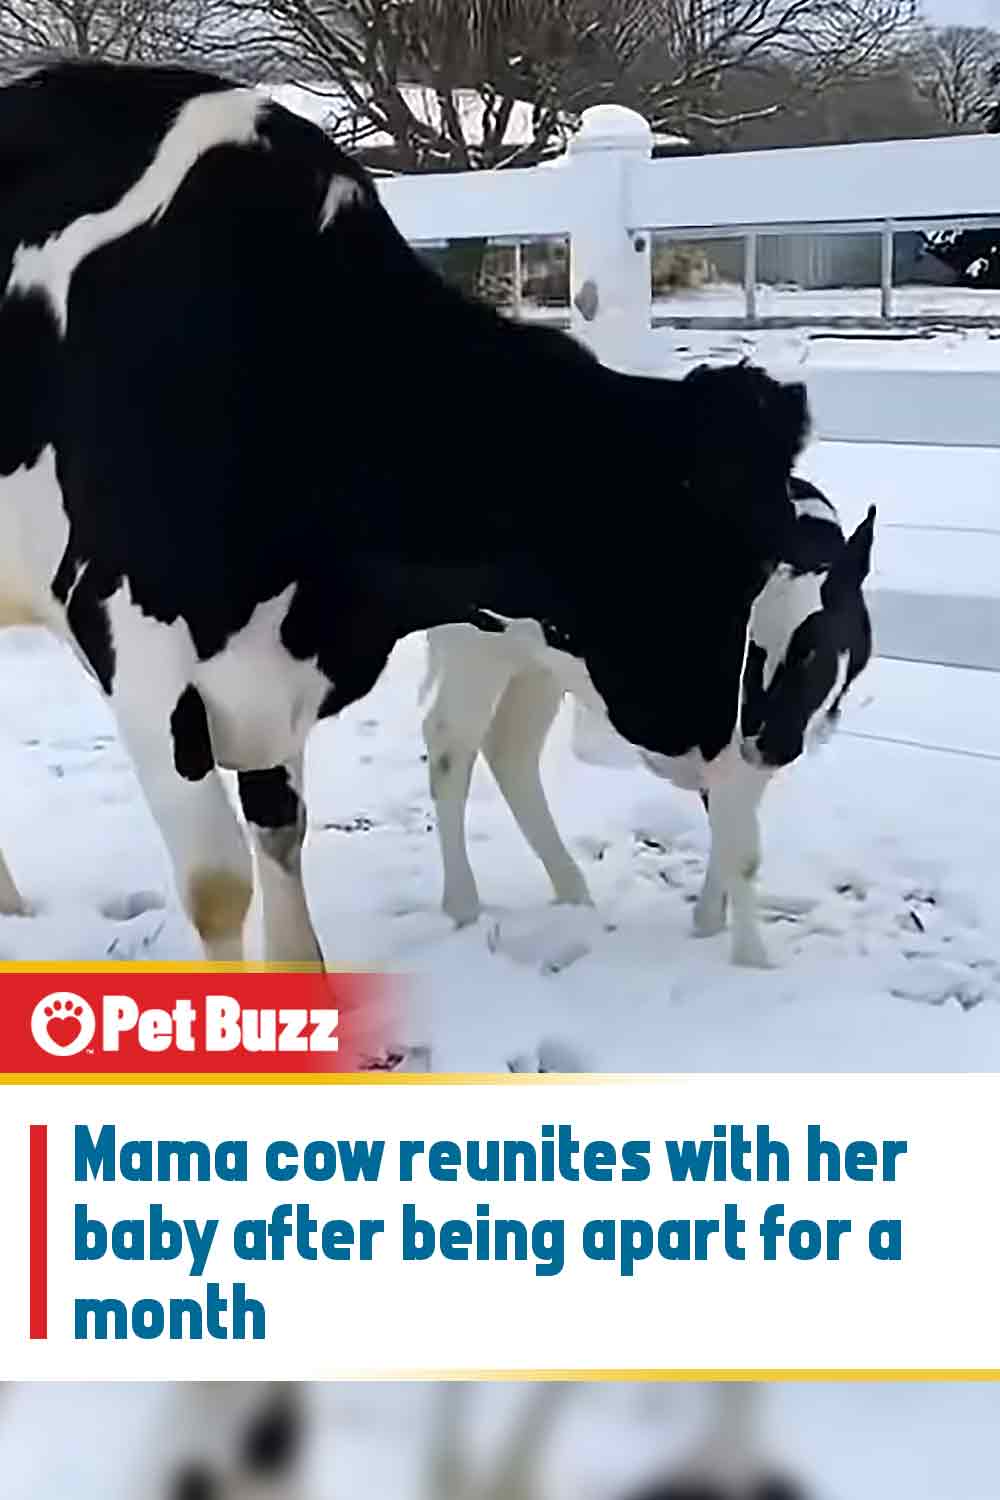 Mama cow reunites with her baby after being apart for a month